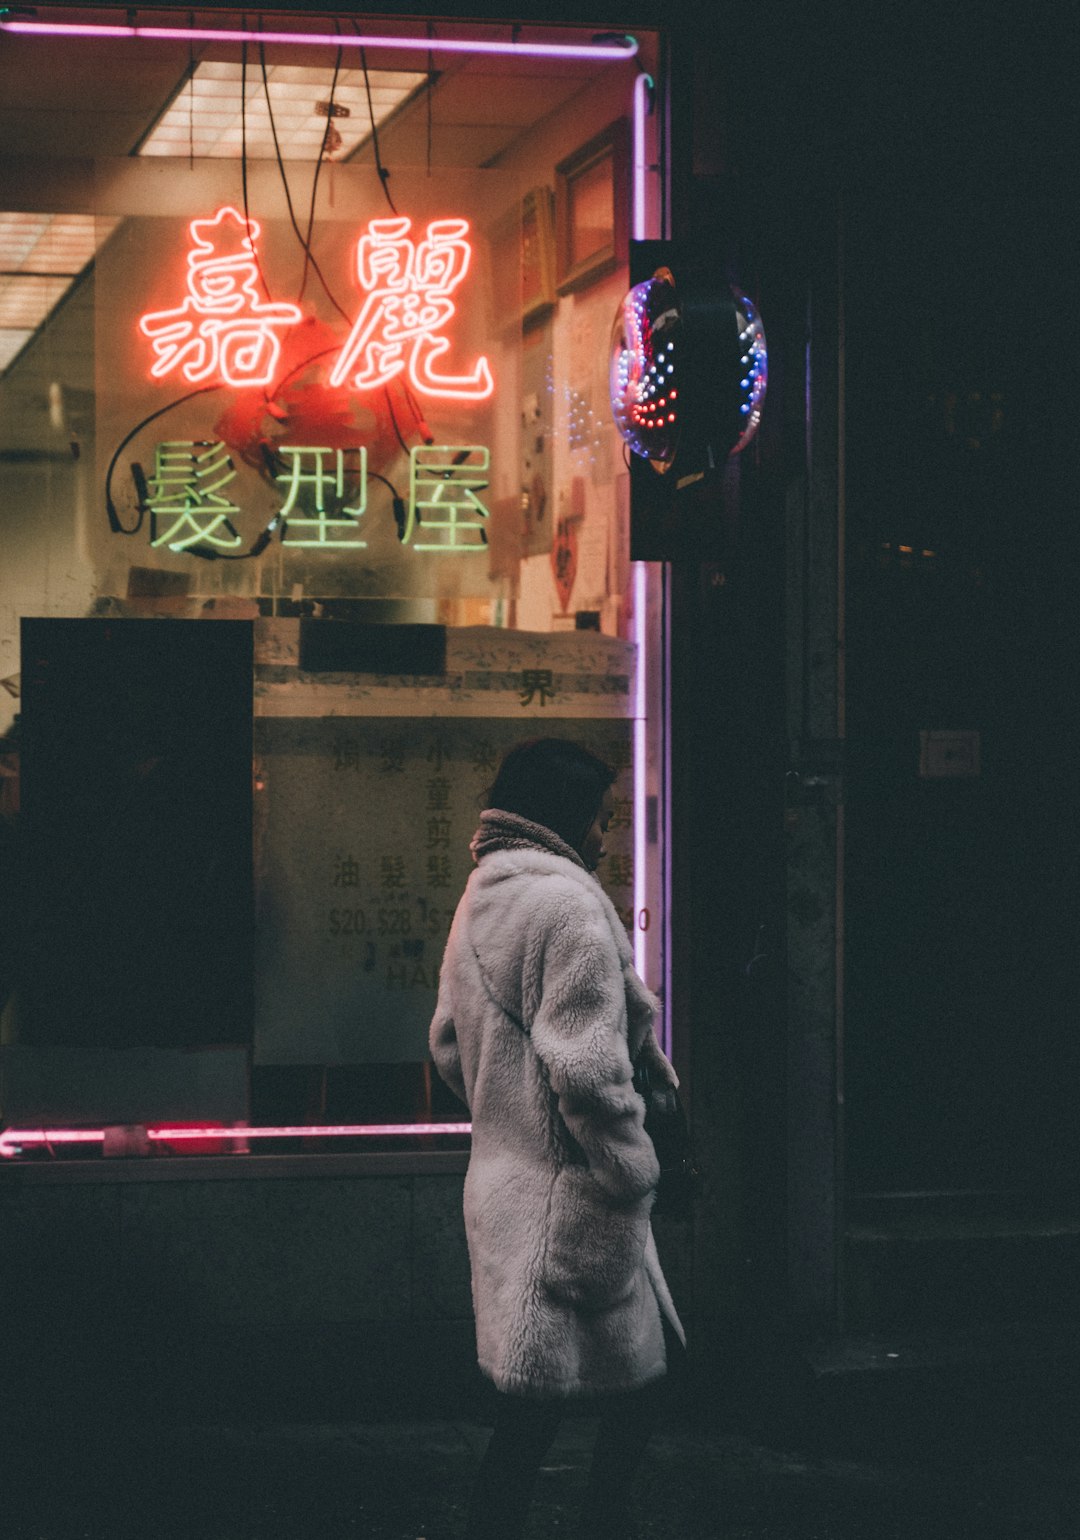 man in gray hoodie standing near red and white neon signage